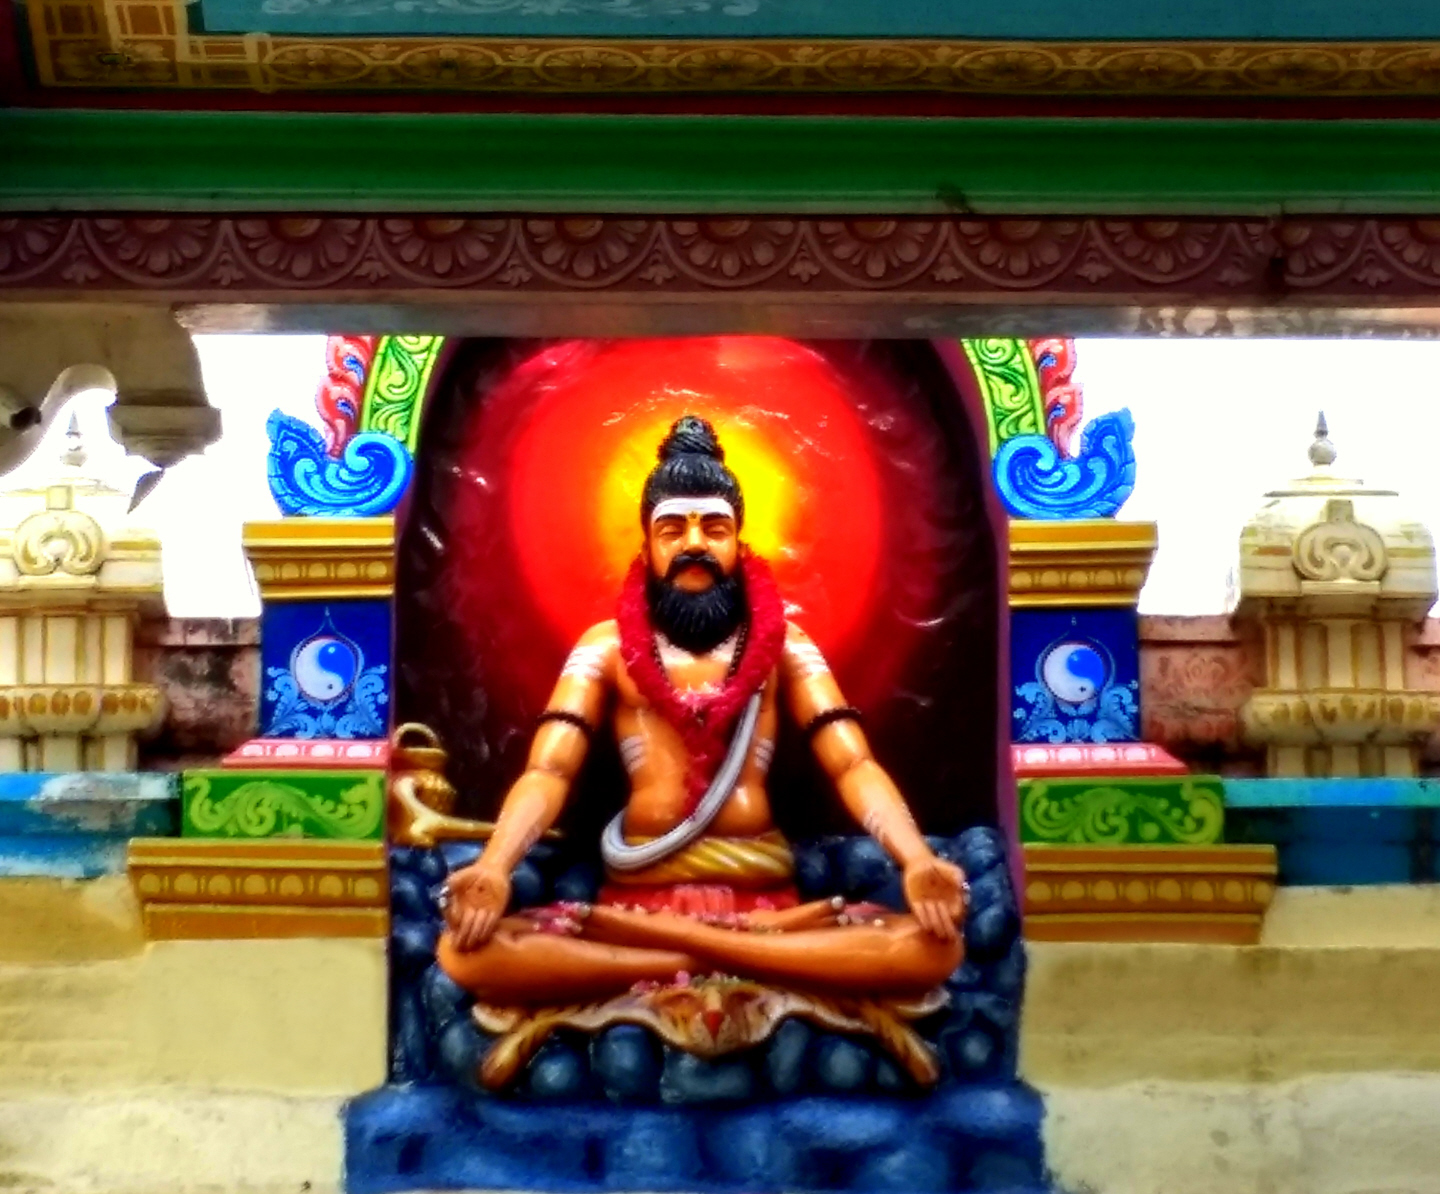 There are 18  major Siddha Saints in the Dravidan Spiritual Tradition this is Sri Bogar the main Siddha Associated with the Palani Temple- Palani, Tamil Nadu - India